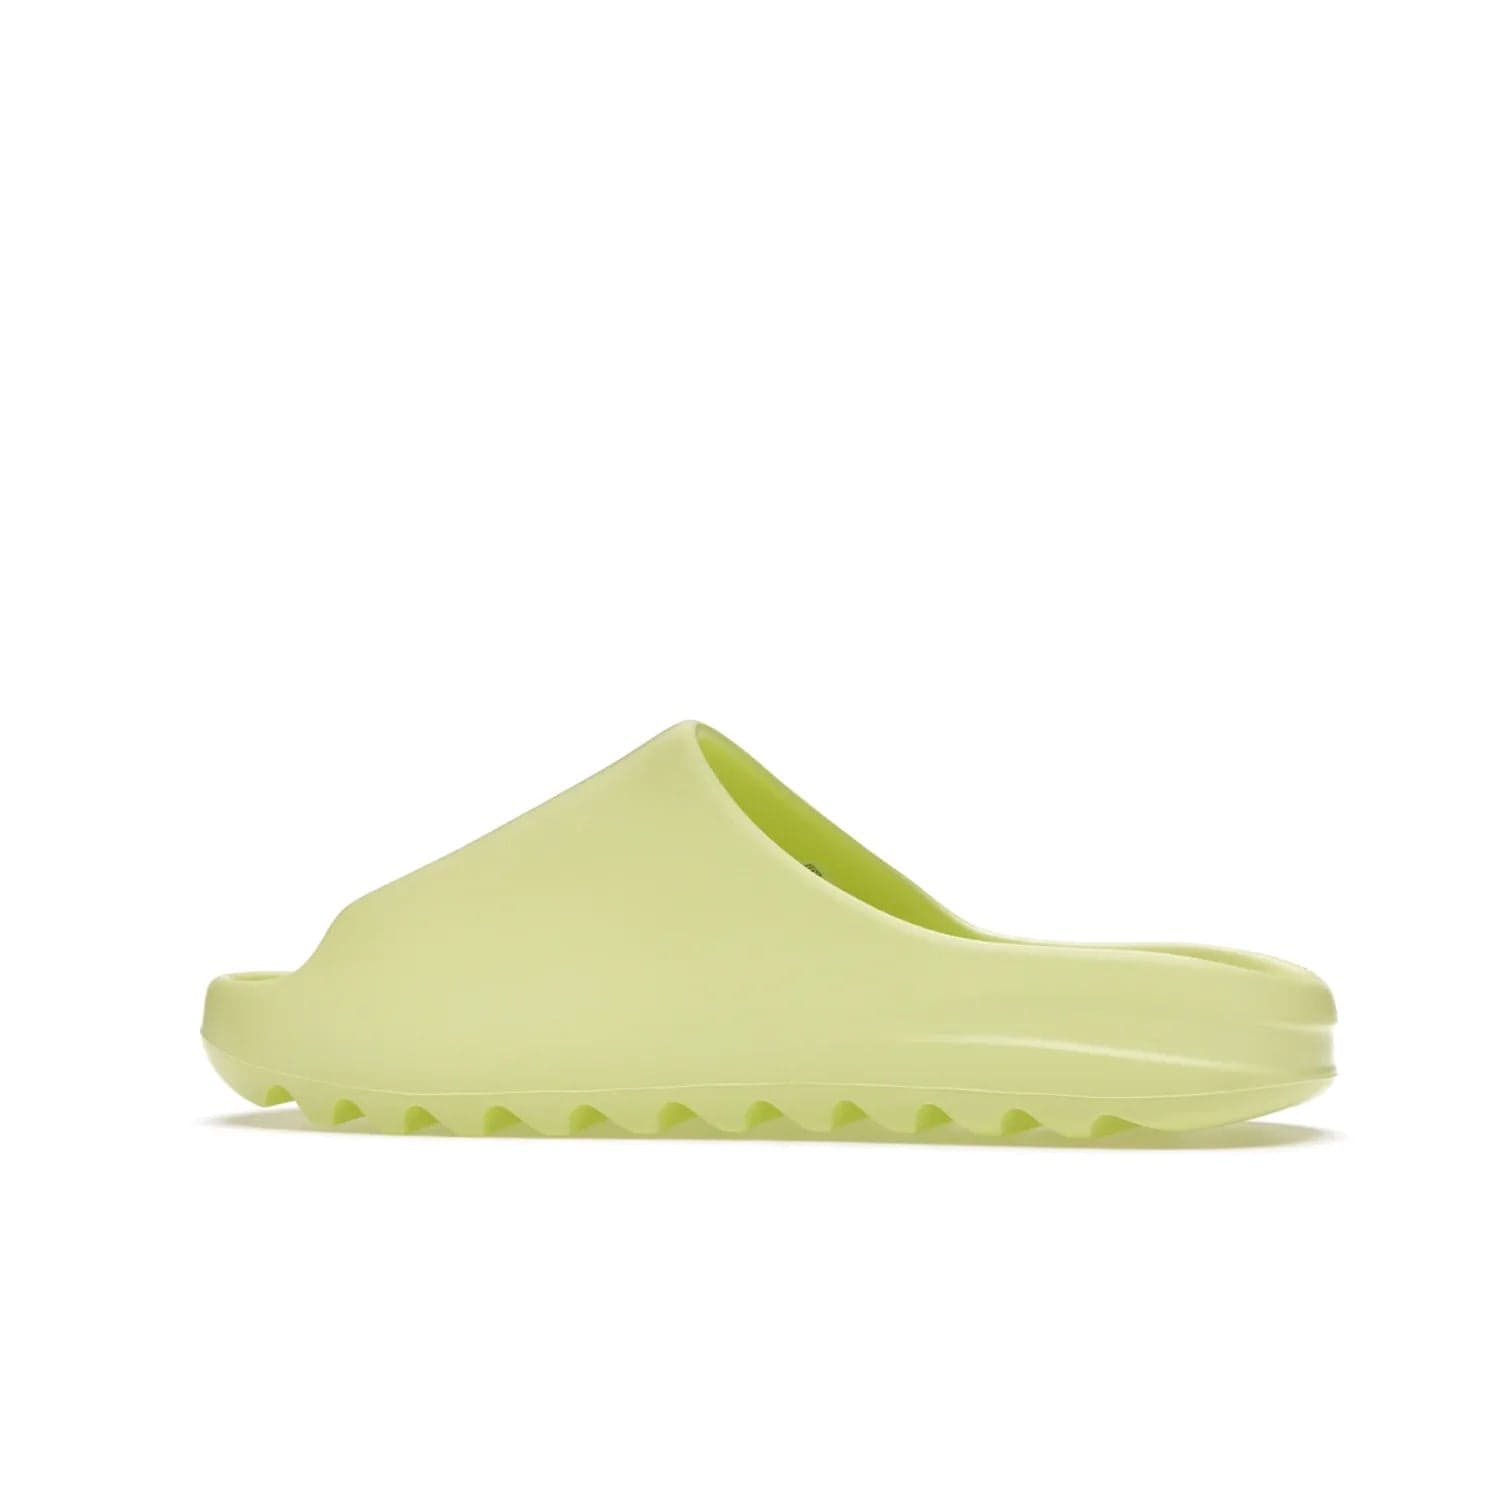 adidas Yeezy Slide Glow Green - Image 21 - Only at www.BallersClubKickz.com - Experience an unexpected summer style with the adidas Yeezy Slide Glow Green. This limited edition slide sandal provides a lightweight and durable construction and a bold Glow Green hue. Strategic grooves enhance traction and provide all-day comfort. Make a statement with the adidas Yeezy Slide Glow Green.